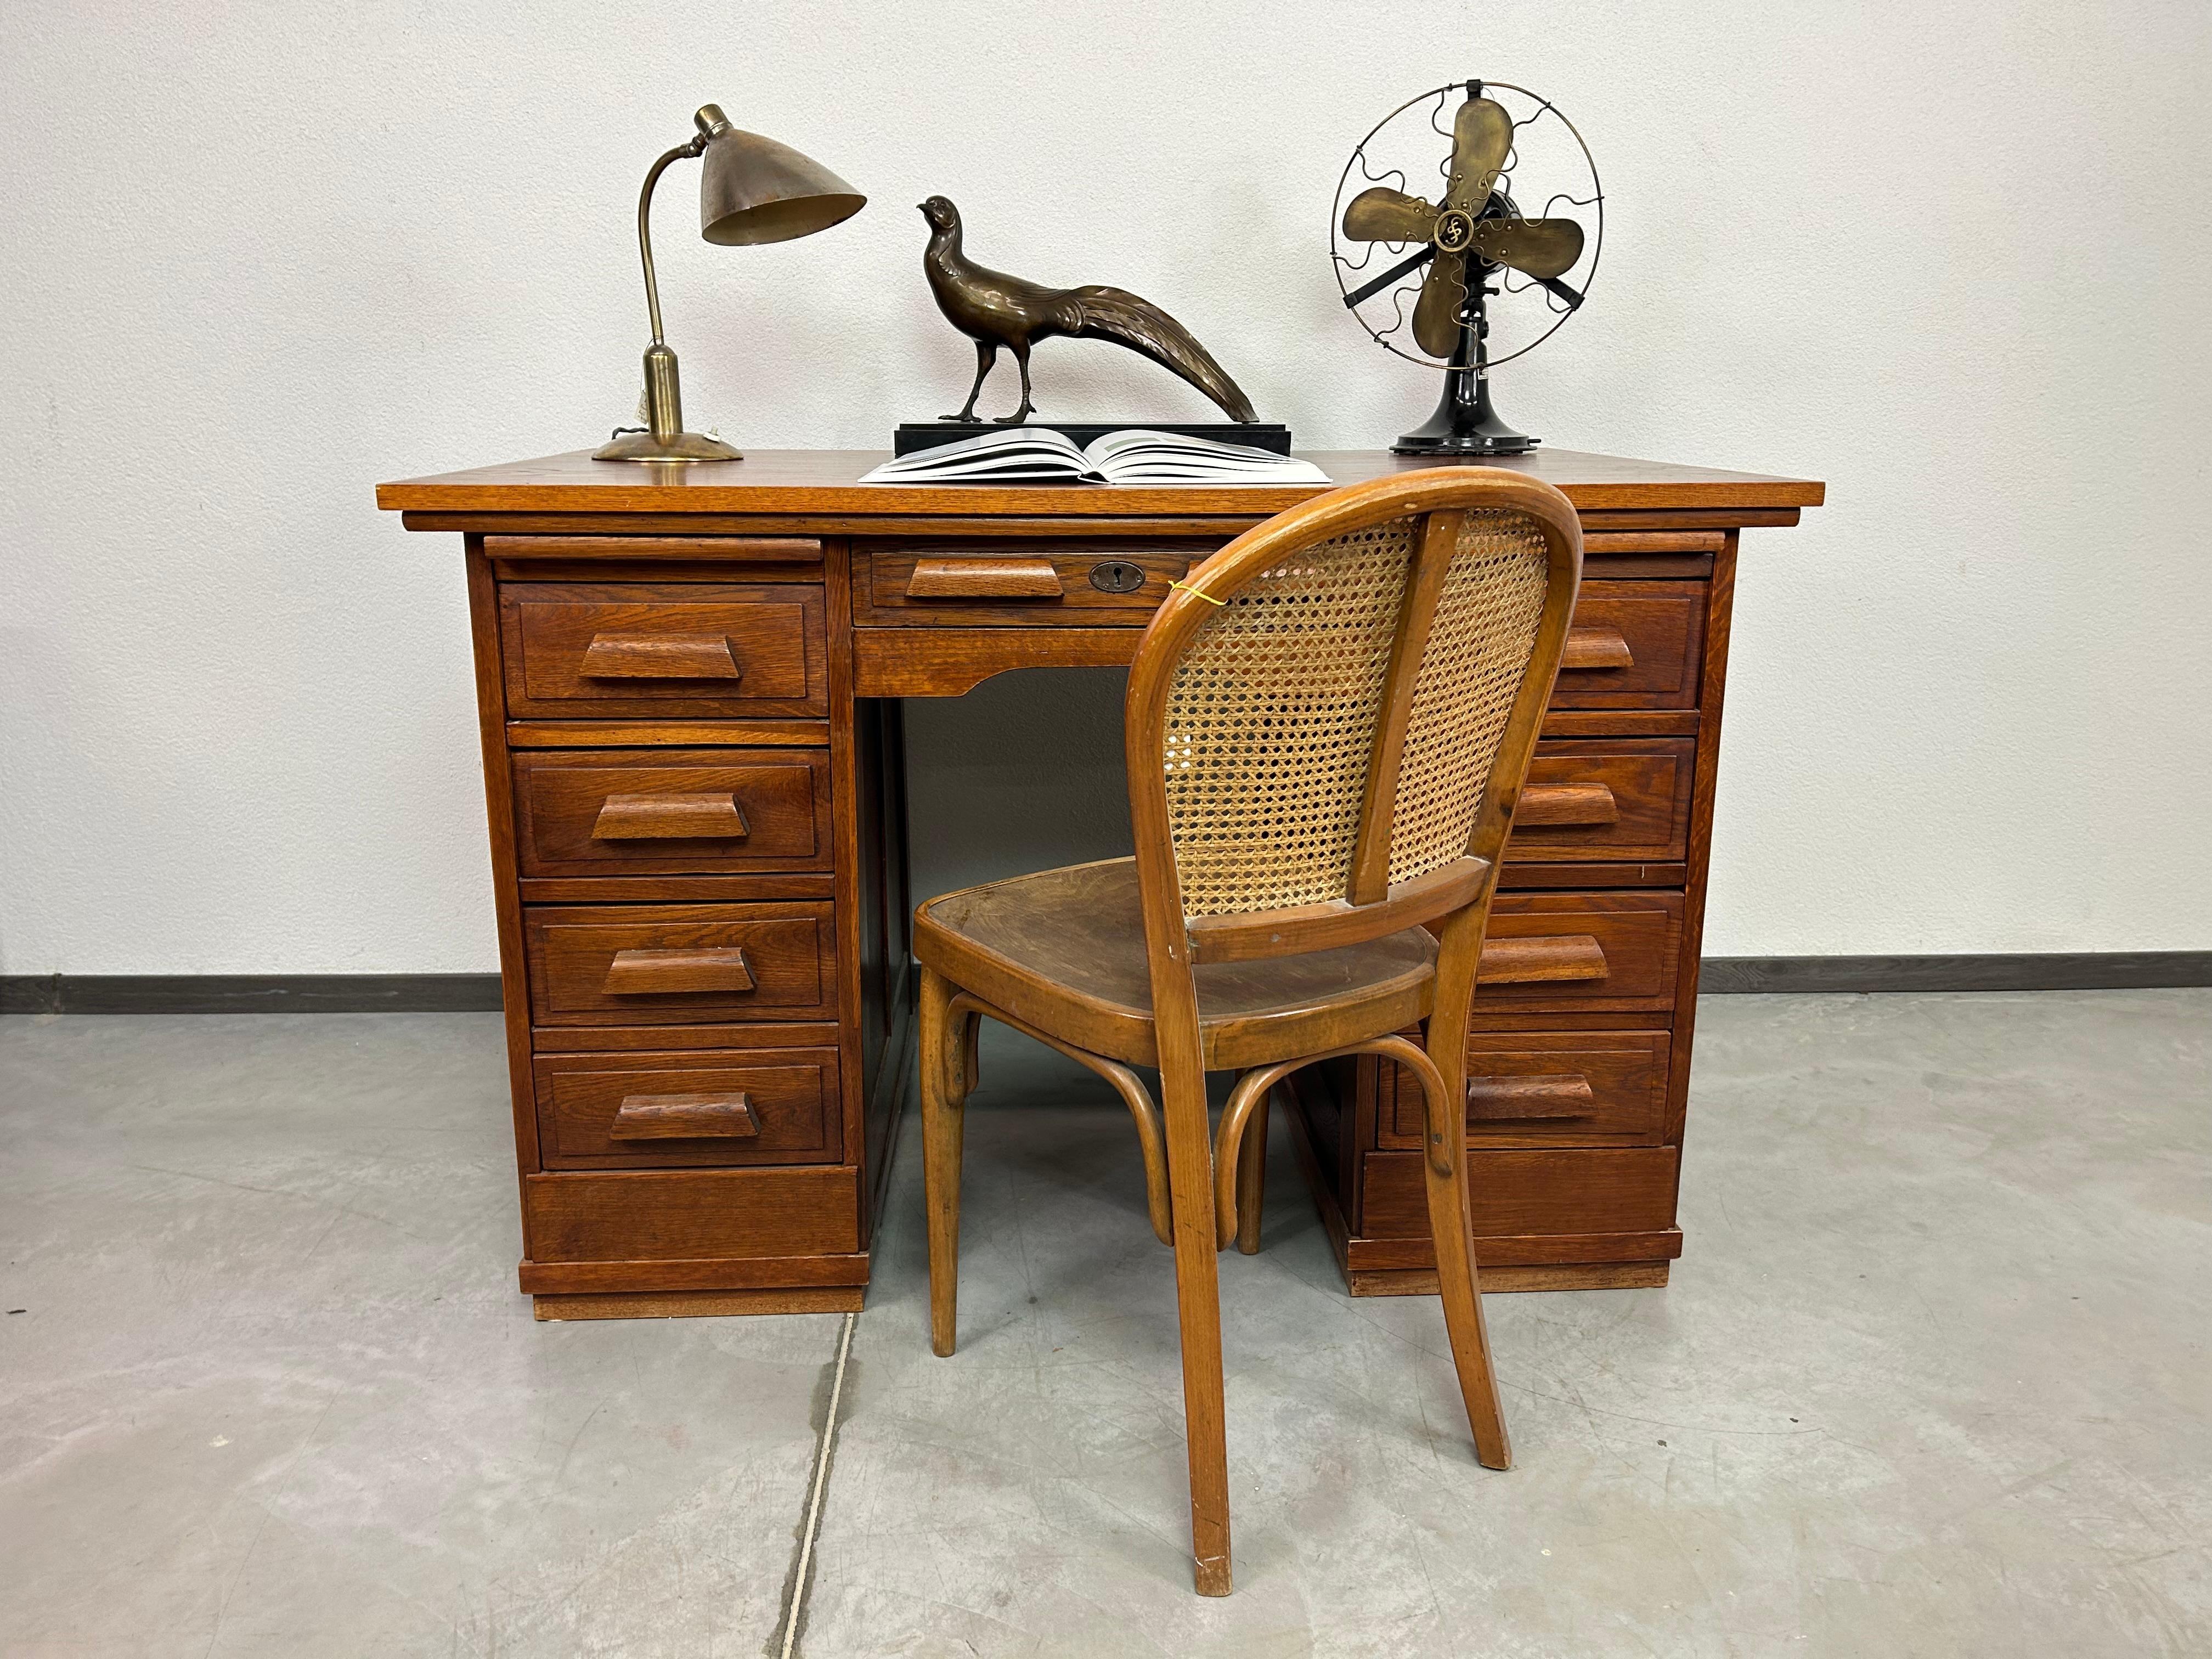 Art deco office writing table in very good condition with signs of use.